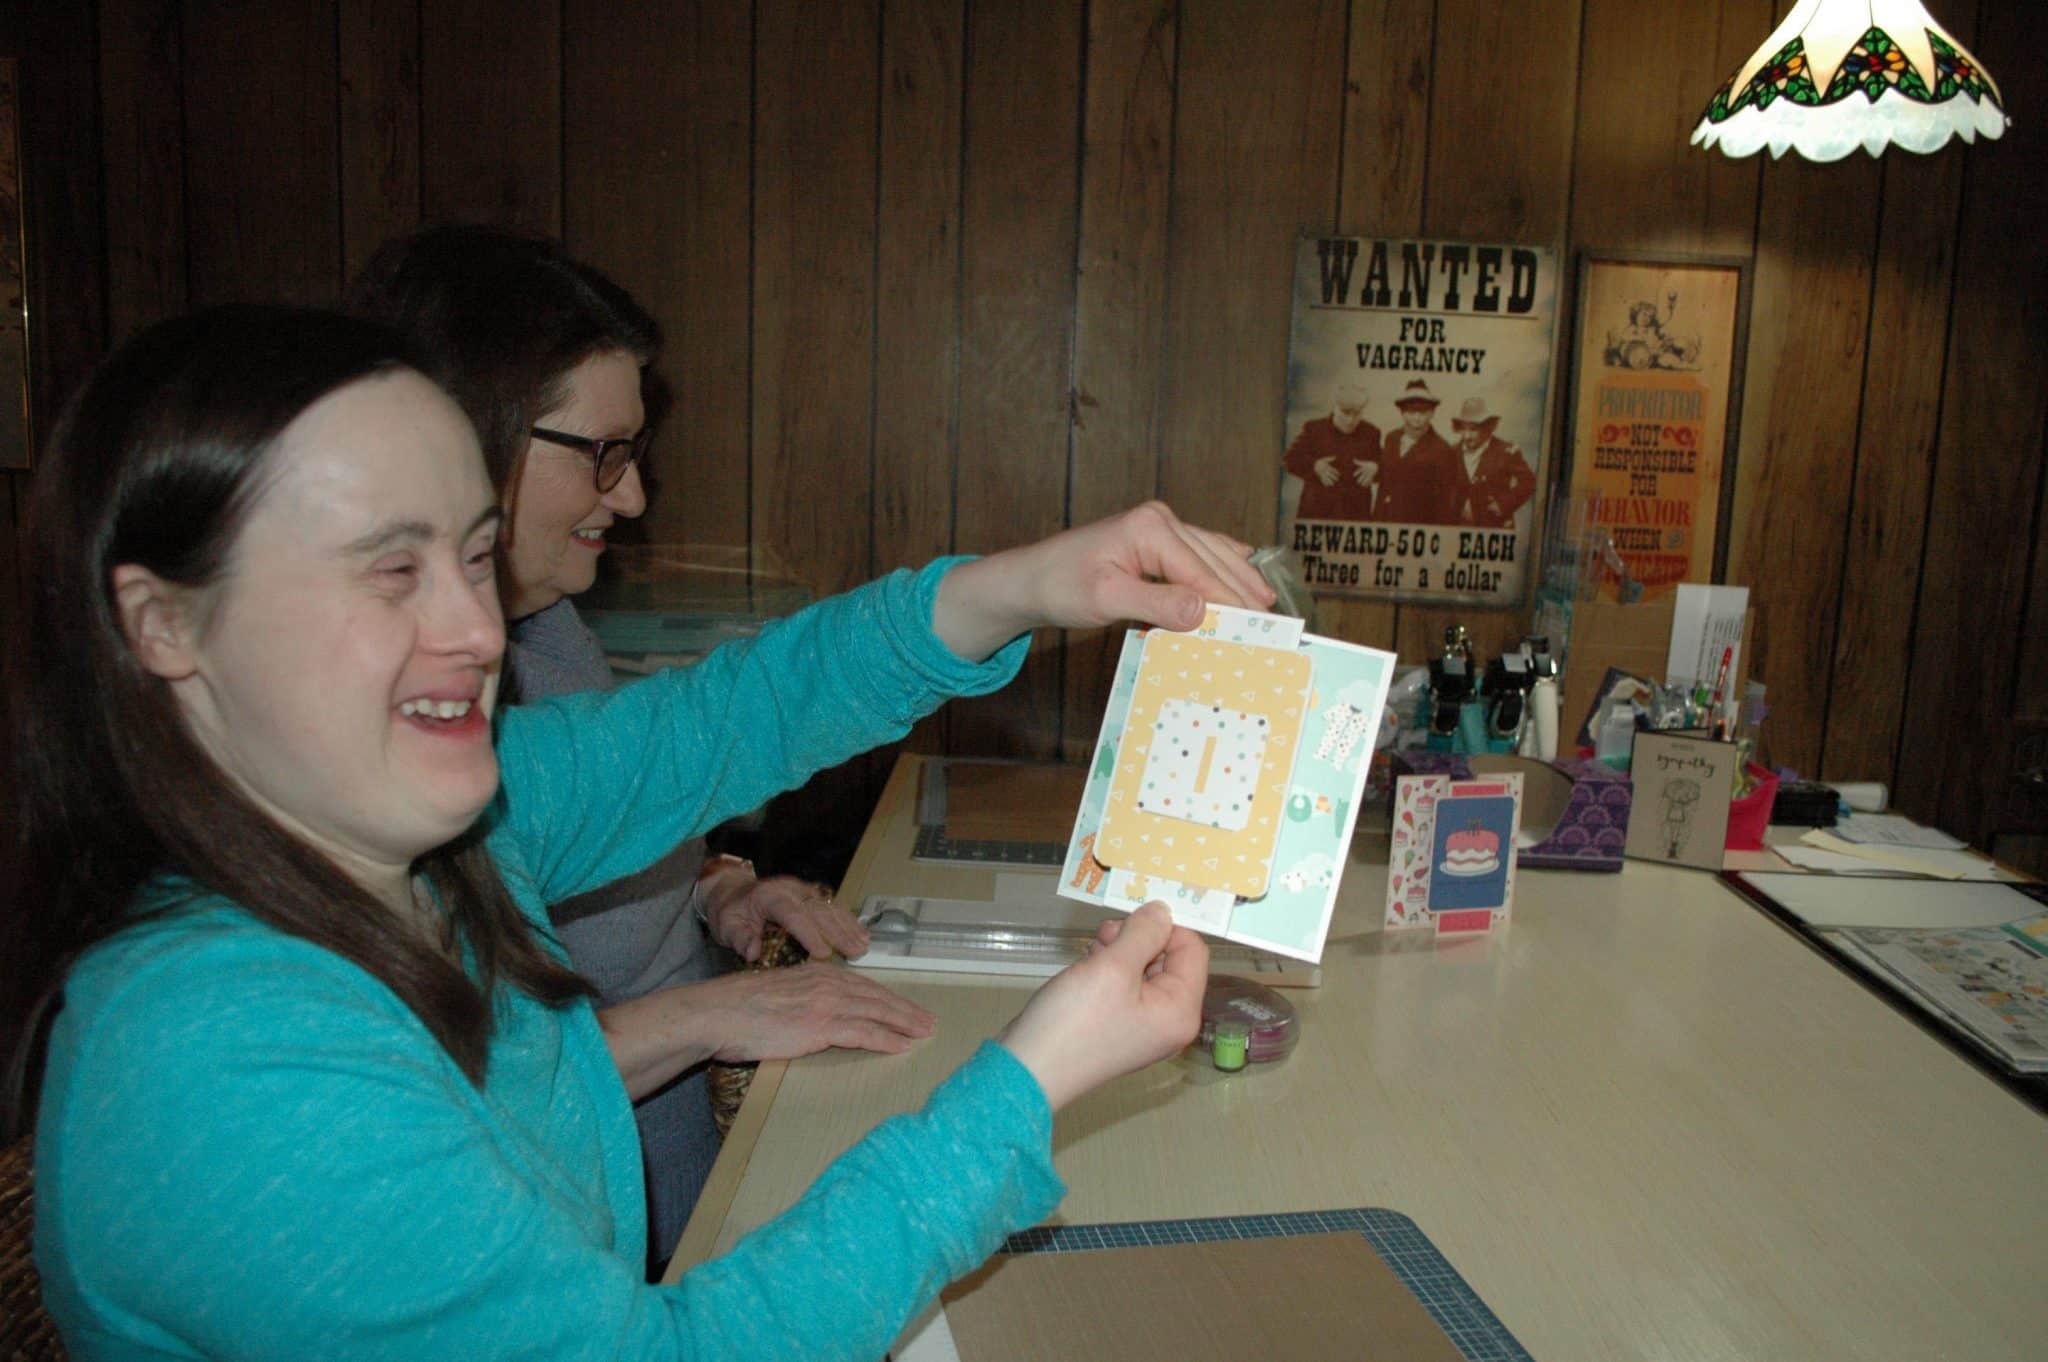 [CREDIT: Rob Borkowski] Katie Lowe, owner of Cheetah Greetings, shows off one of her hand-crafted greeting cards.